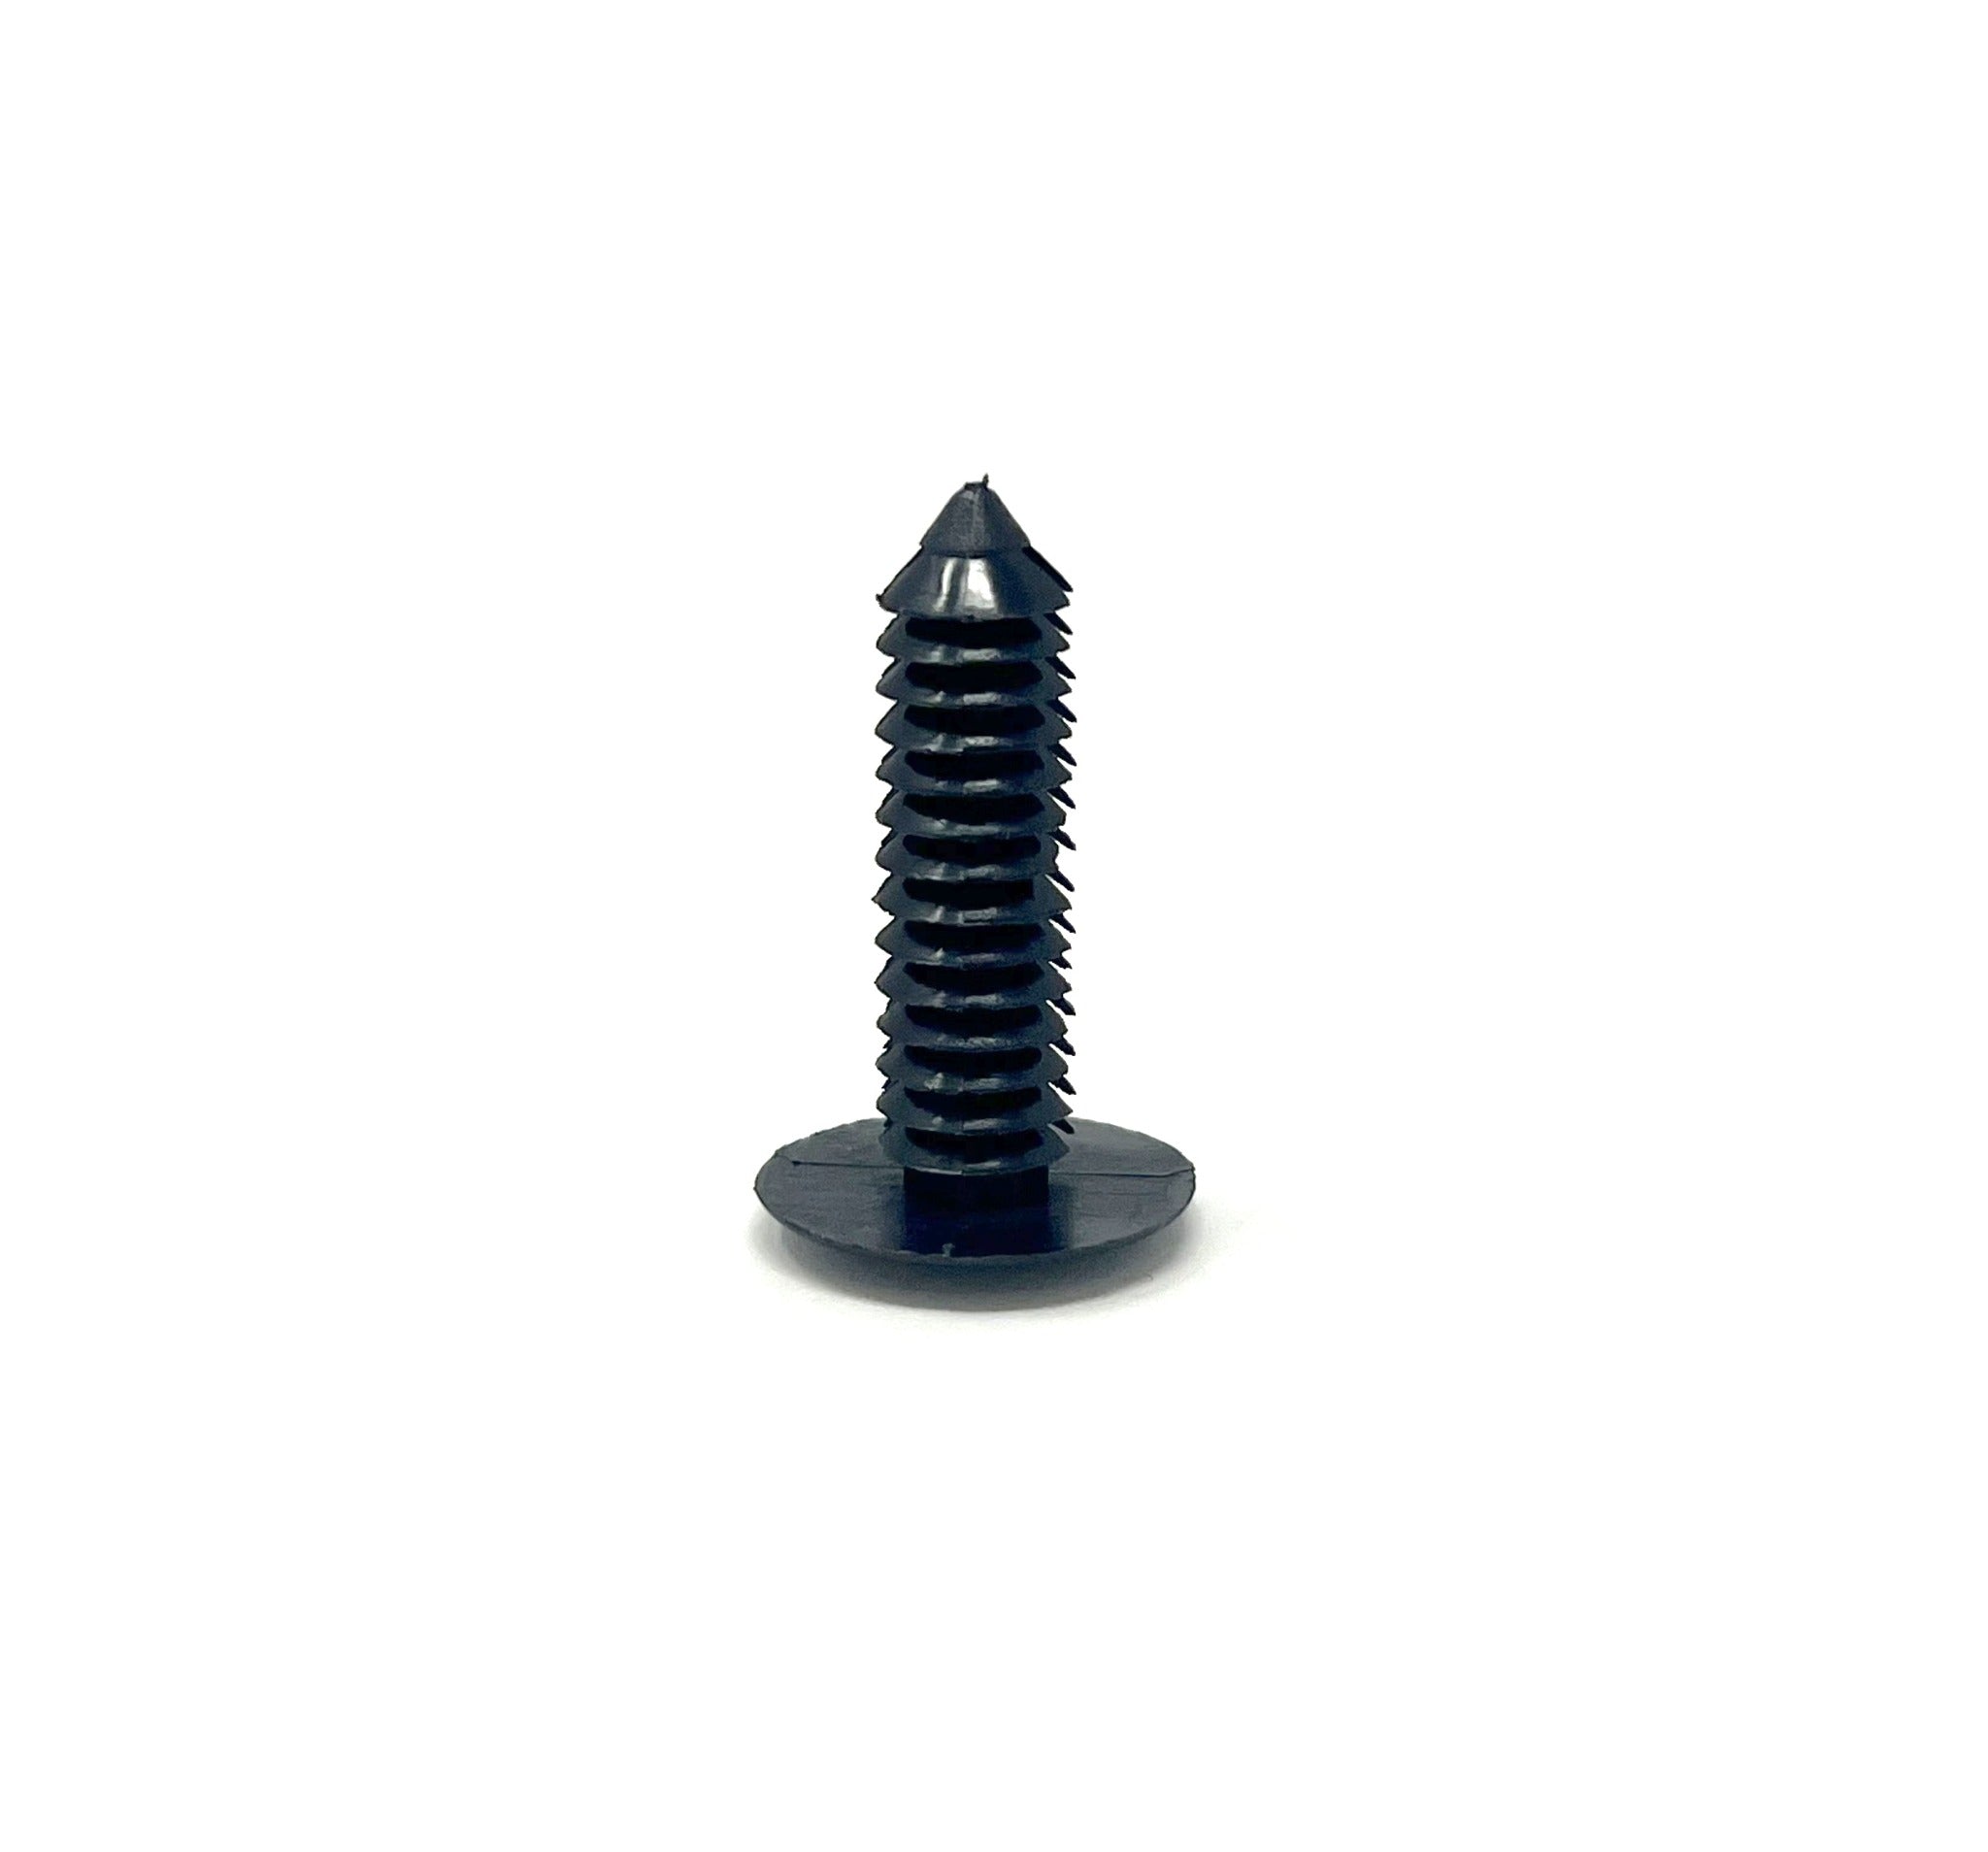 Black Nylon Shield Retainers   9/32" Hole 1 11/64" Stem Lgth (Pack of 25)